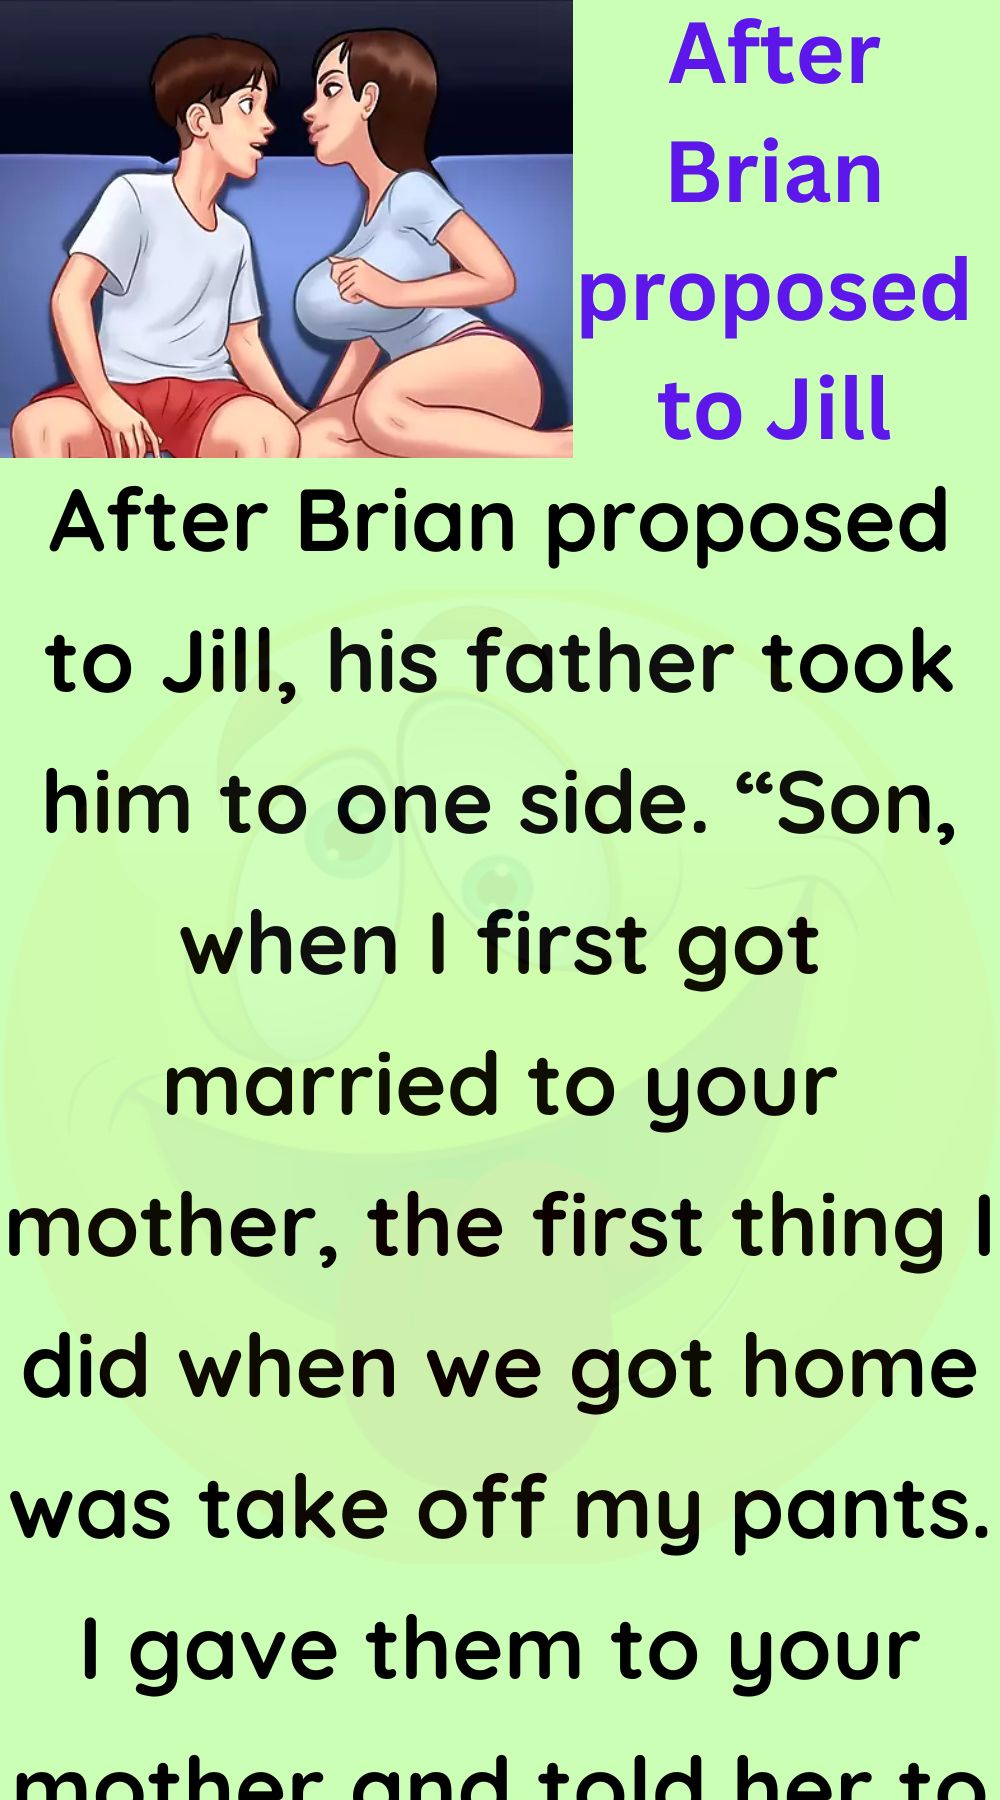 After Brian proposed to Jill